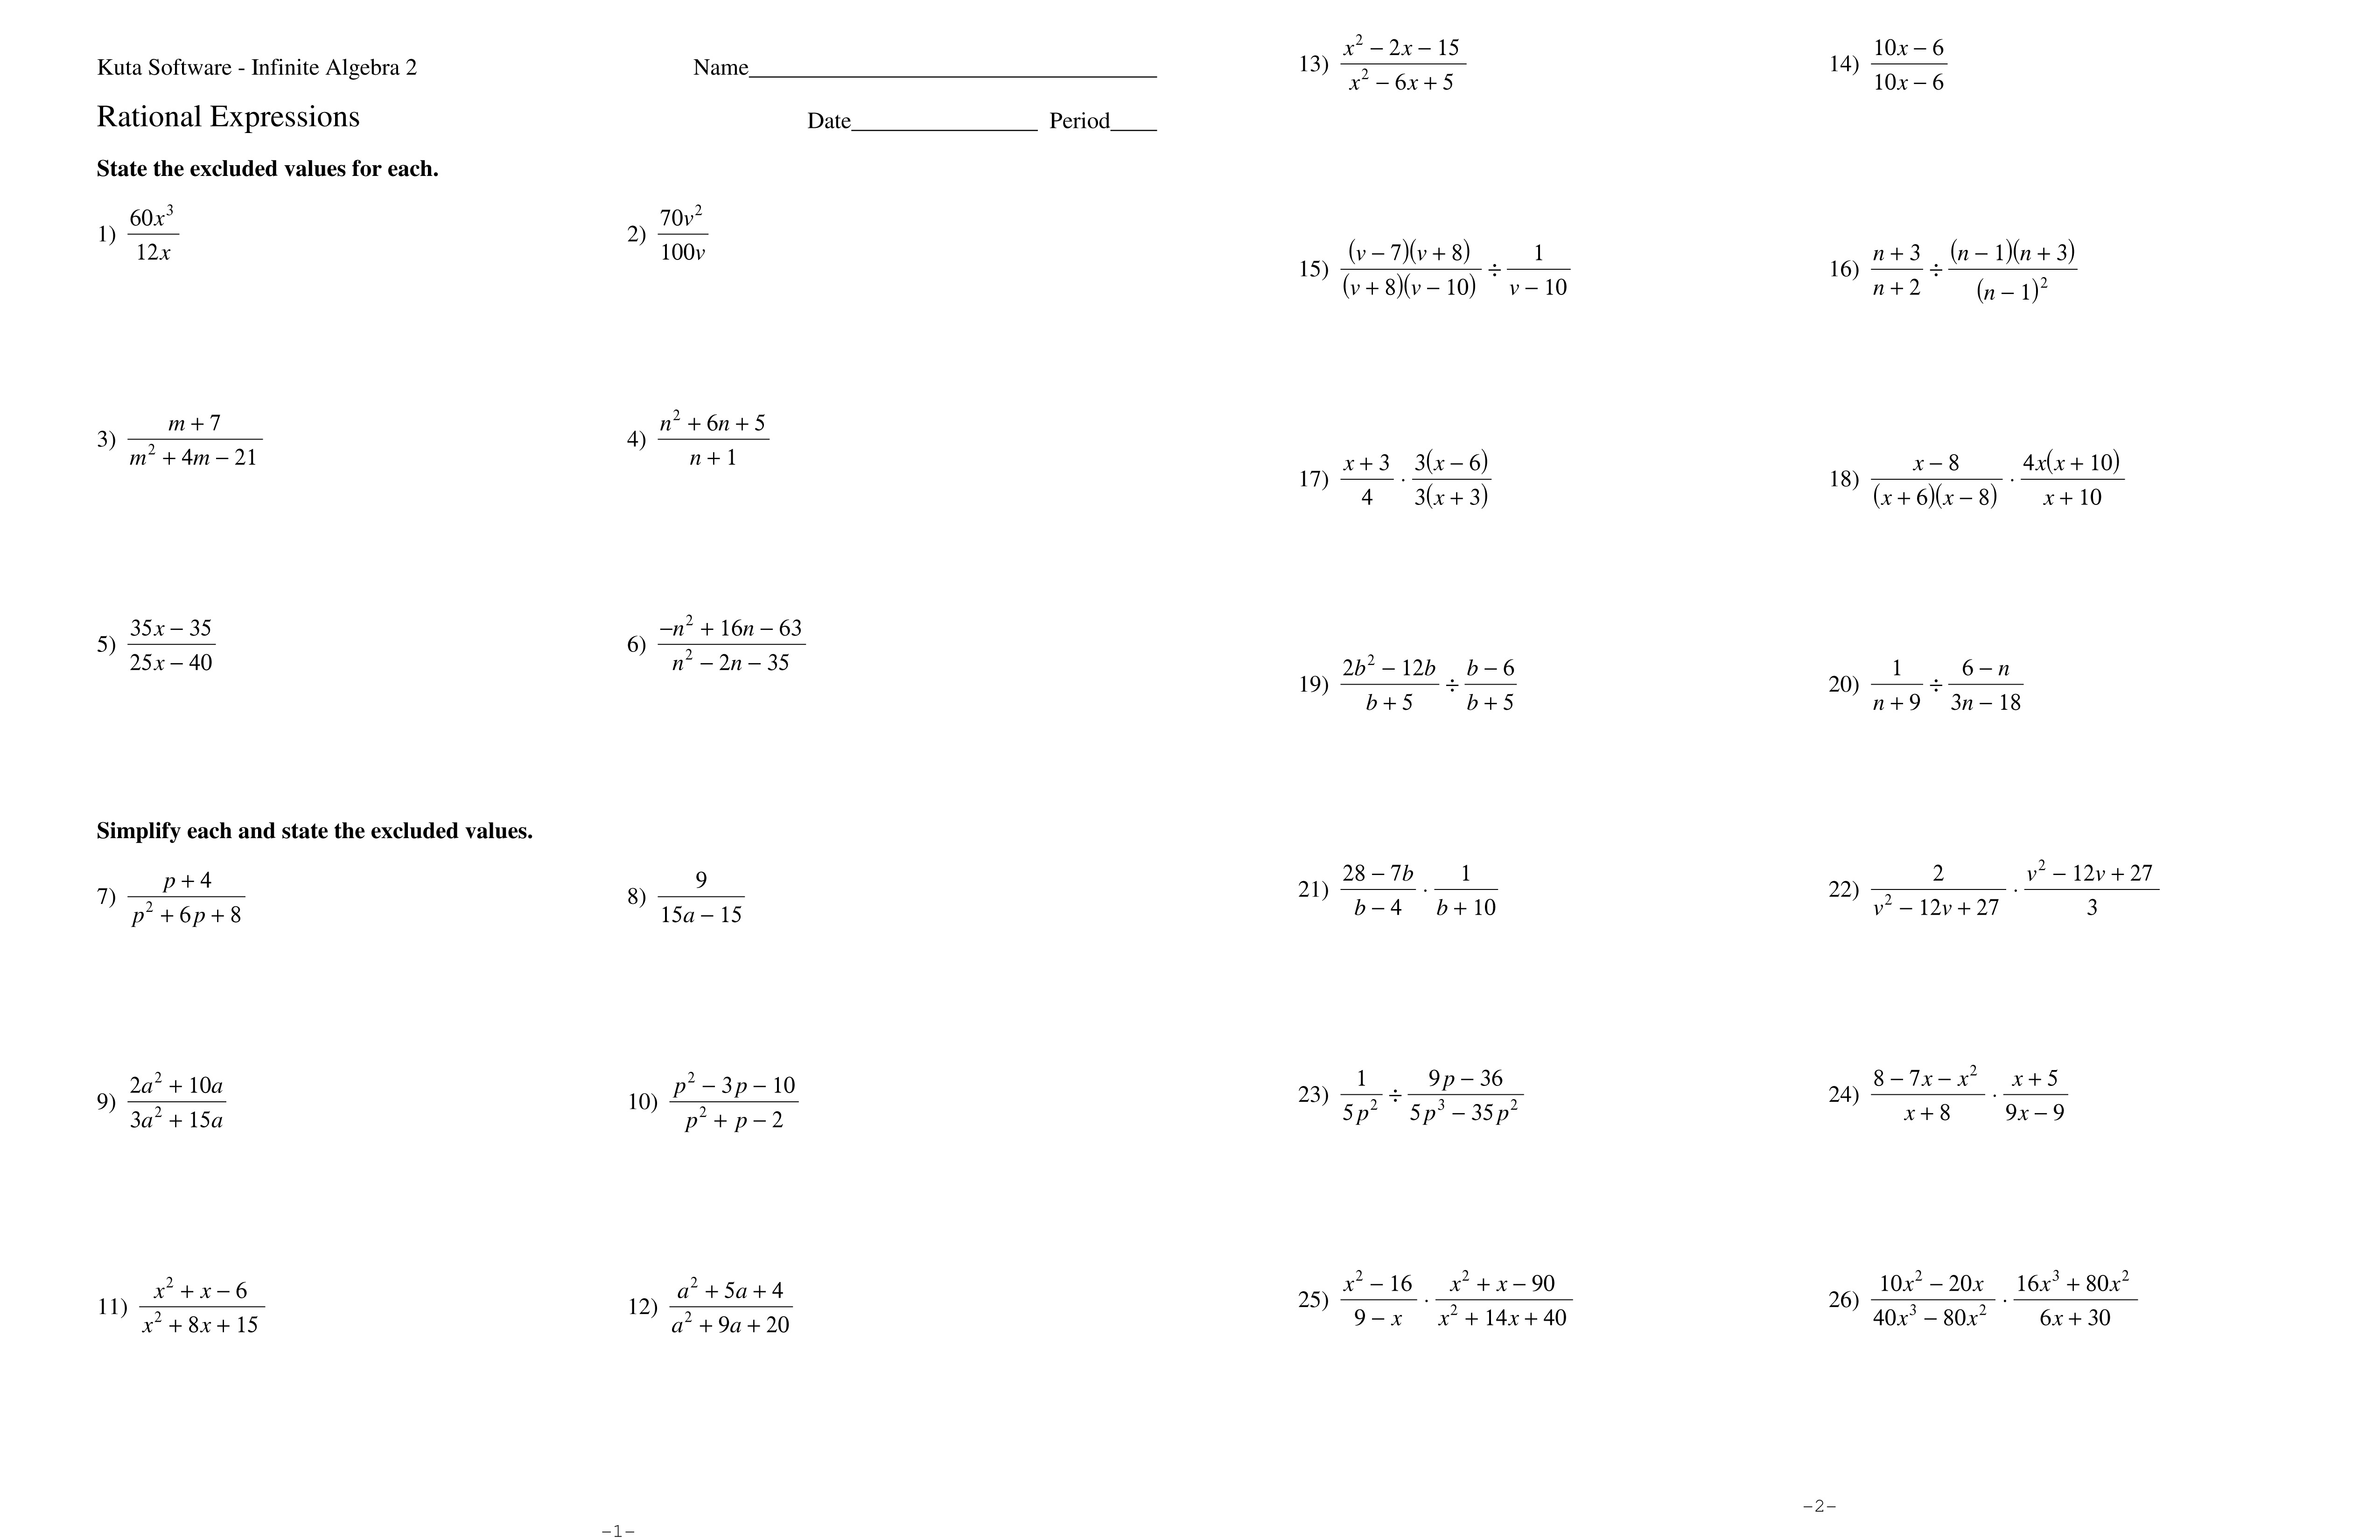 Adding Subtracting Rational Expressions Worksheet Answer Image